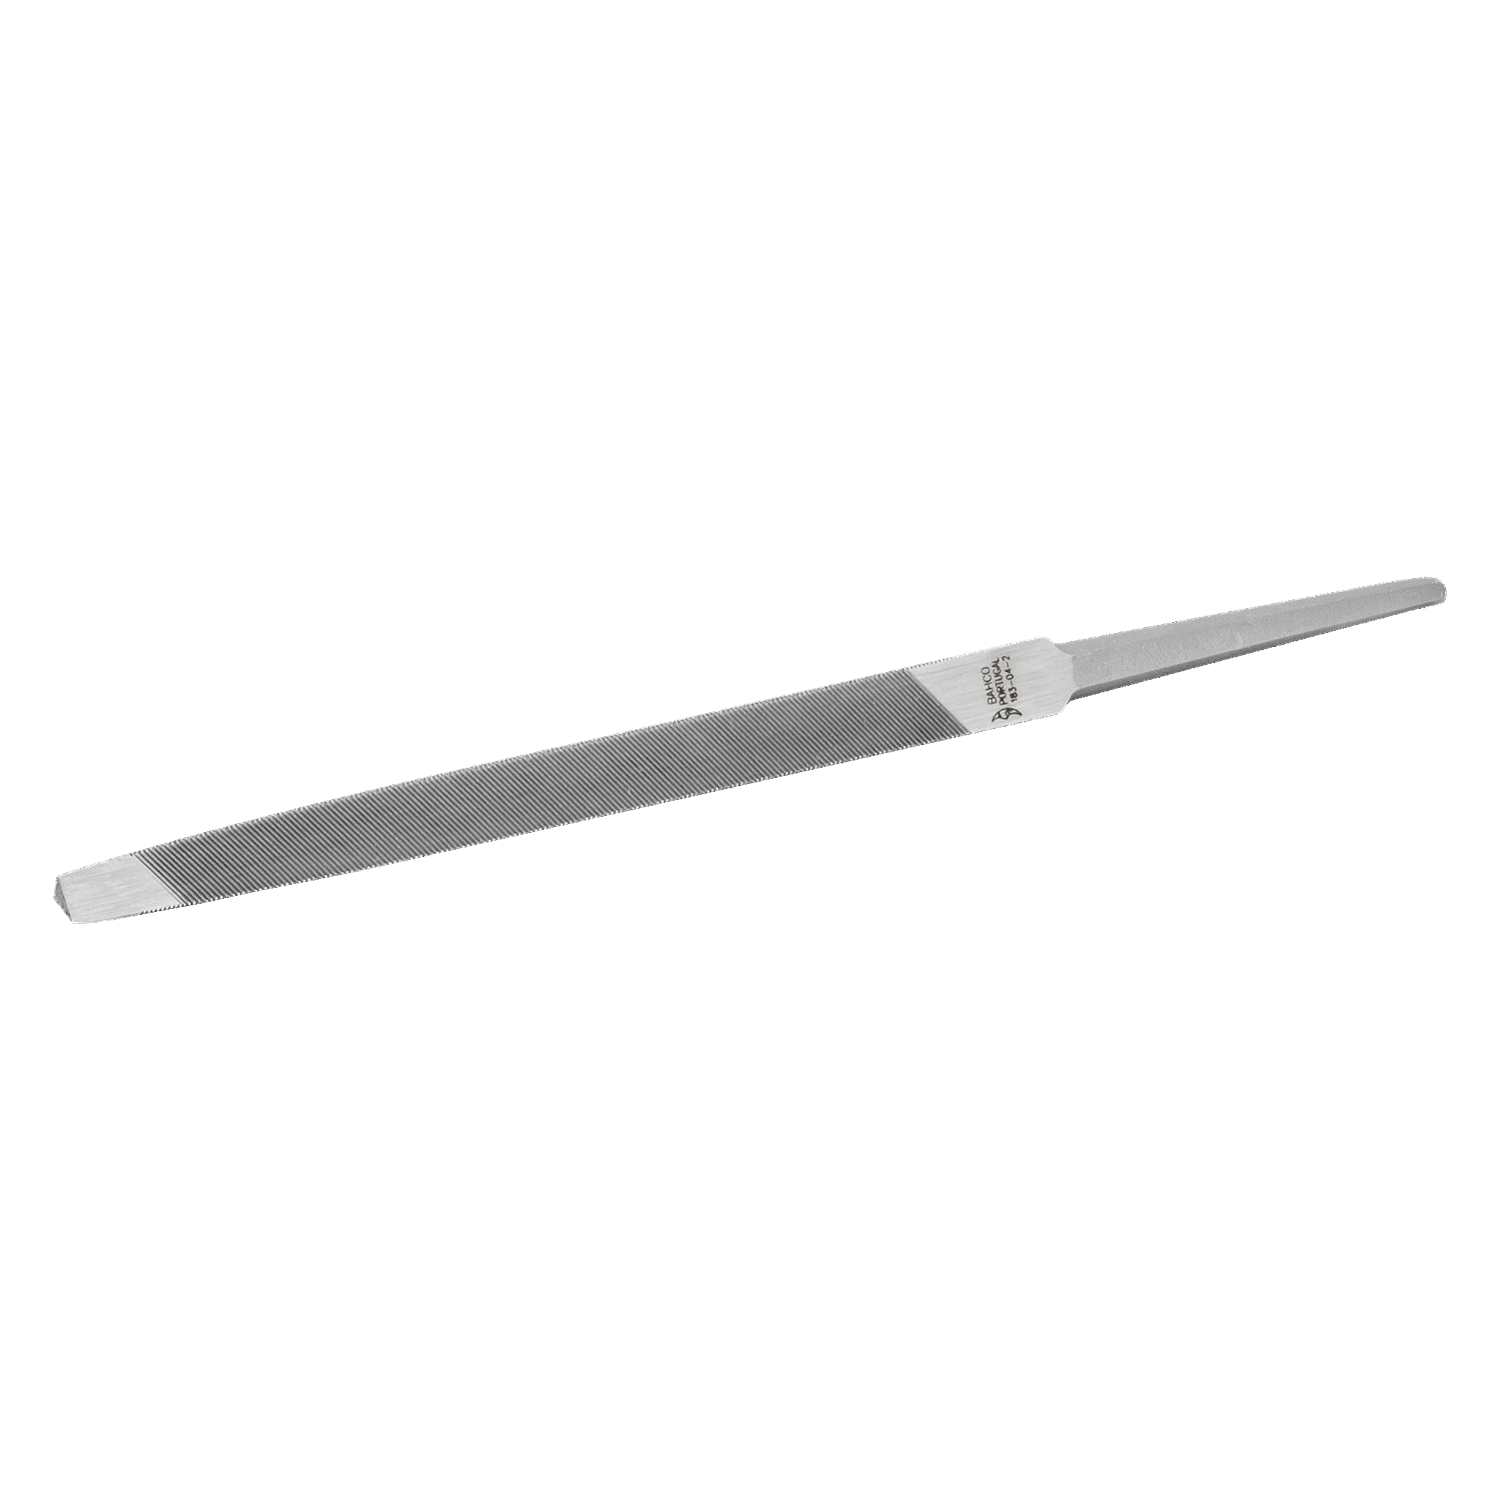 BAHCO 4-183-0 Taper Saw File Second Cut Unhandled (BAHCO Tools) - Premium Taper Saw File from BAHCO - Shop now at Yew Aik.